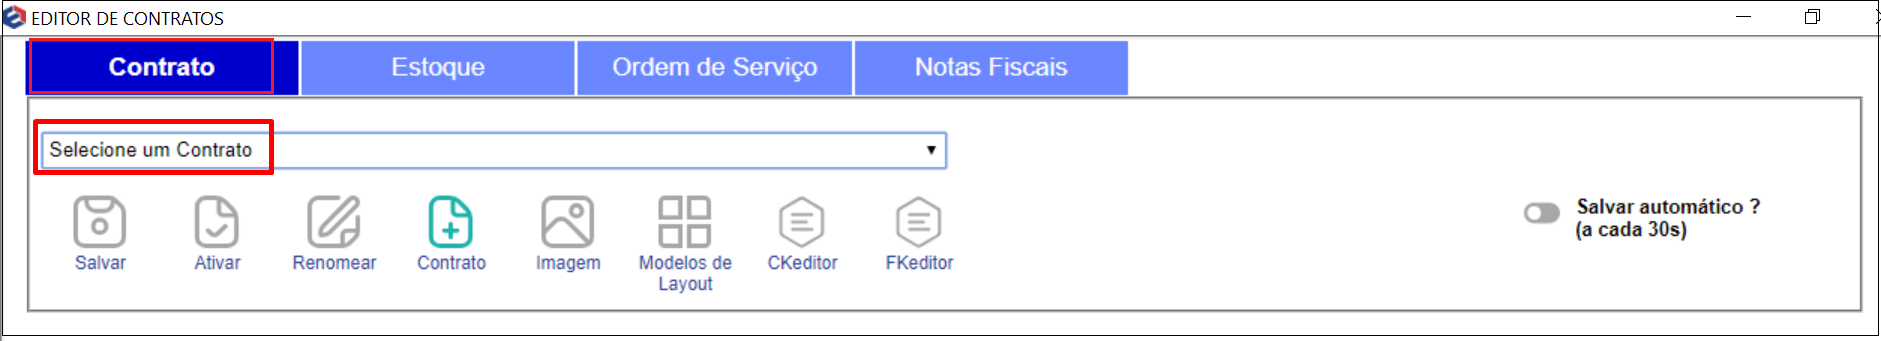 TelaEditorContratosSelecContr.png